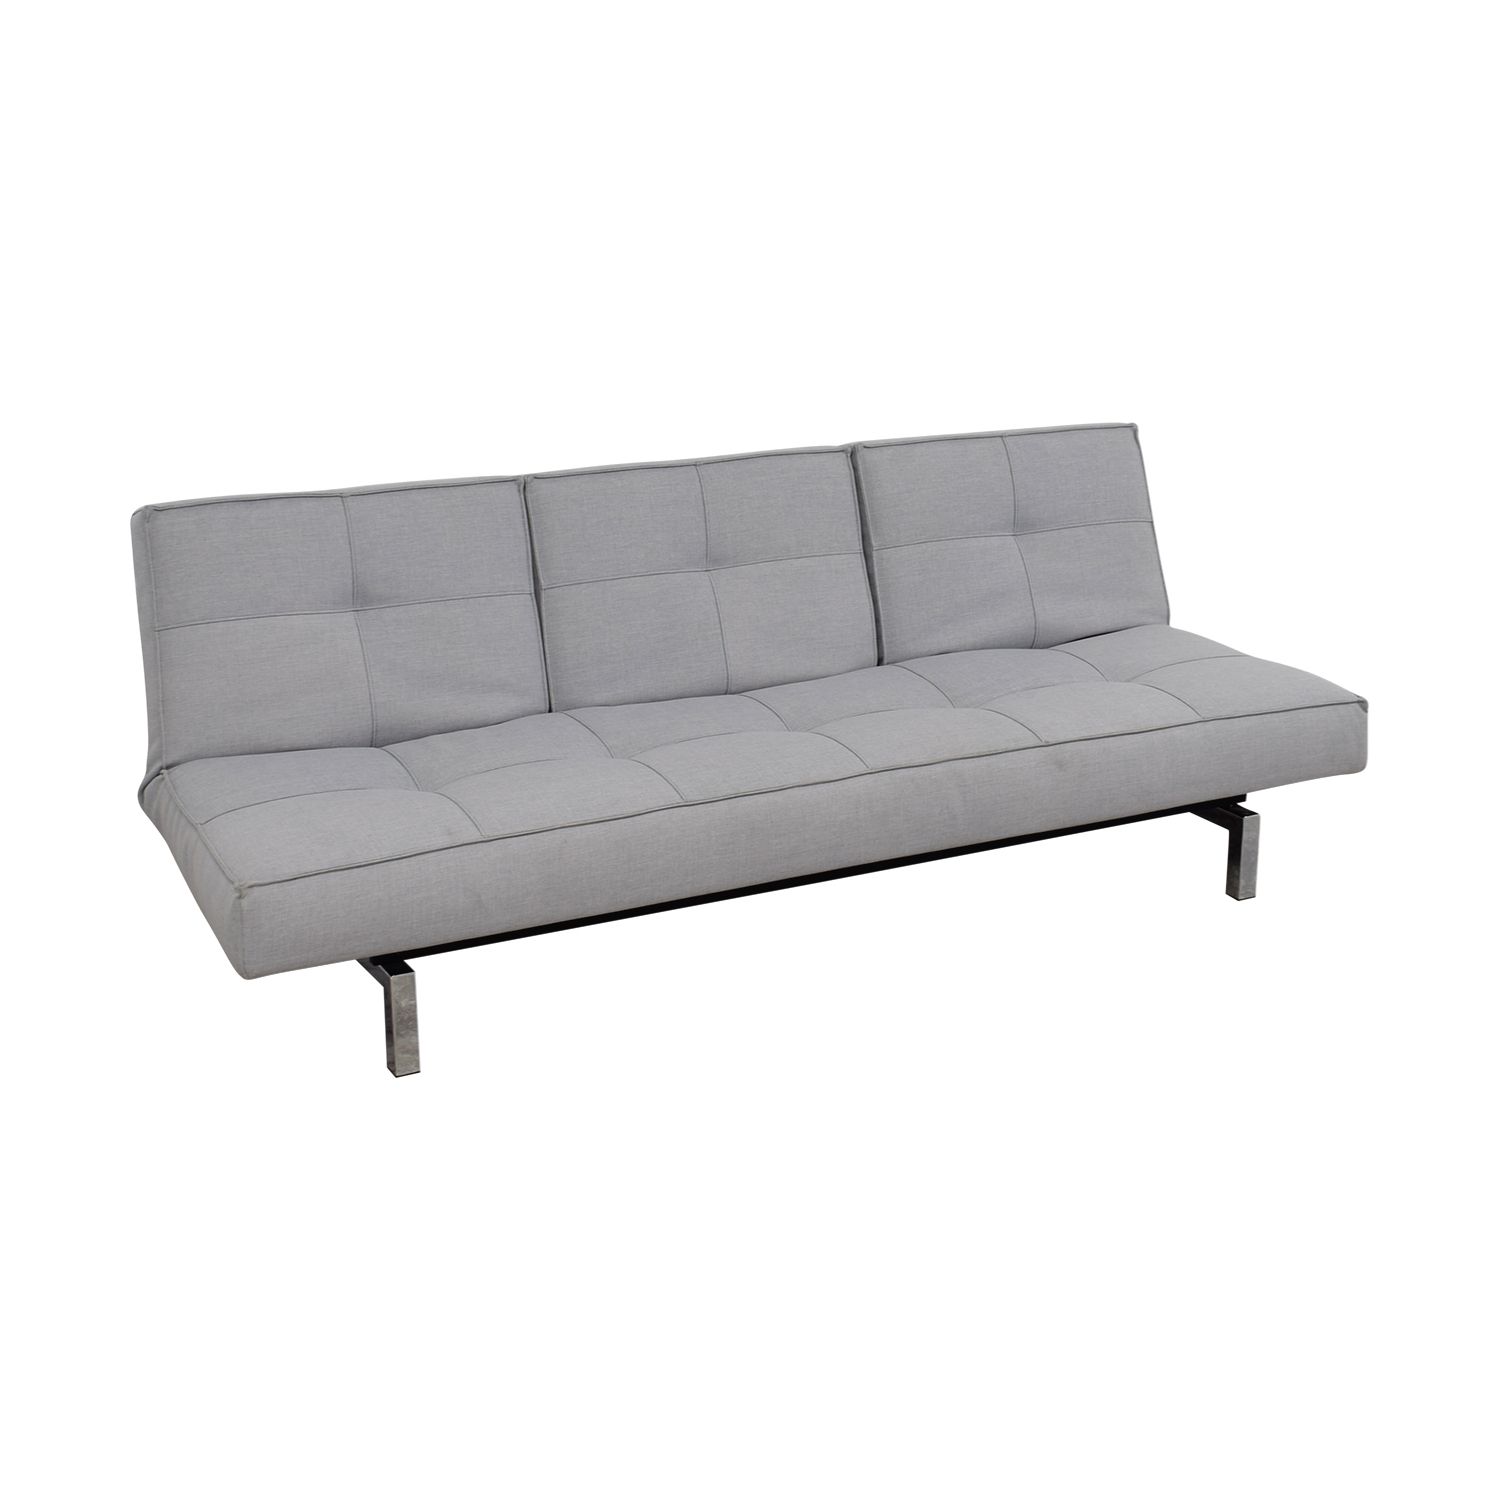 [%42% Off – Innovation Living Innovation Convertible Grey Tufted Sleeper With Preferred Tufted Convertible Sleeper Sofas|tufted Convertible Sleeper Sofas Throughout Well Known 42% Off – Innovation Living Innovation Convertible Grey Tufted Sleeper|most Recently Released Tufted Convertible Sleeper Sofas Regarding 42% Off – Innovation Living Innovation Convertible Grey Tufted Sleeper|most Recent 42% Off – Innovation Living Innovation Convertible Grey Tufted Sleeper Within Tufted Convertible Sleeper Sofas%] (Photo 11 of 15)